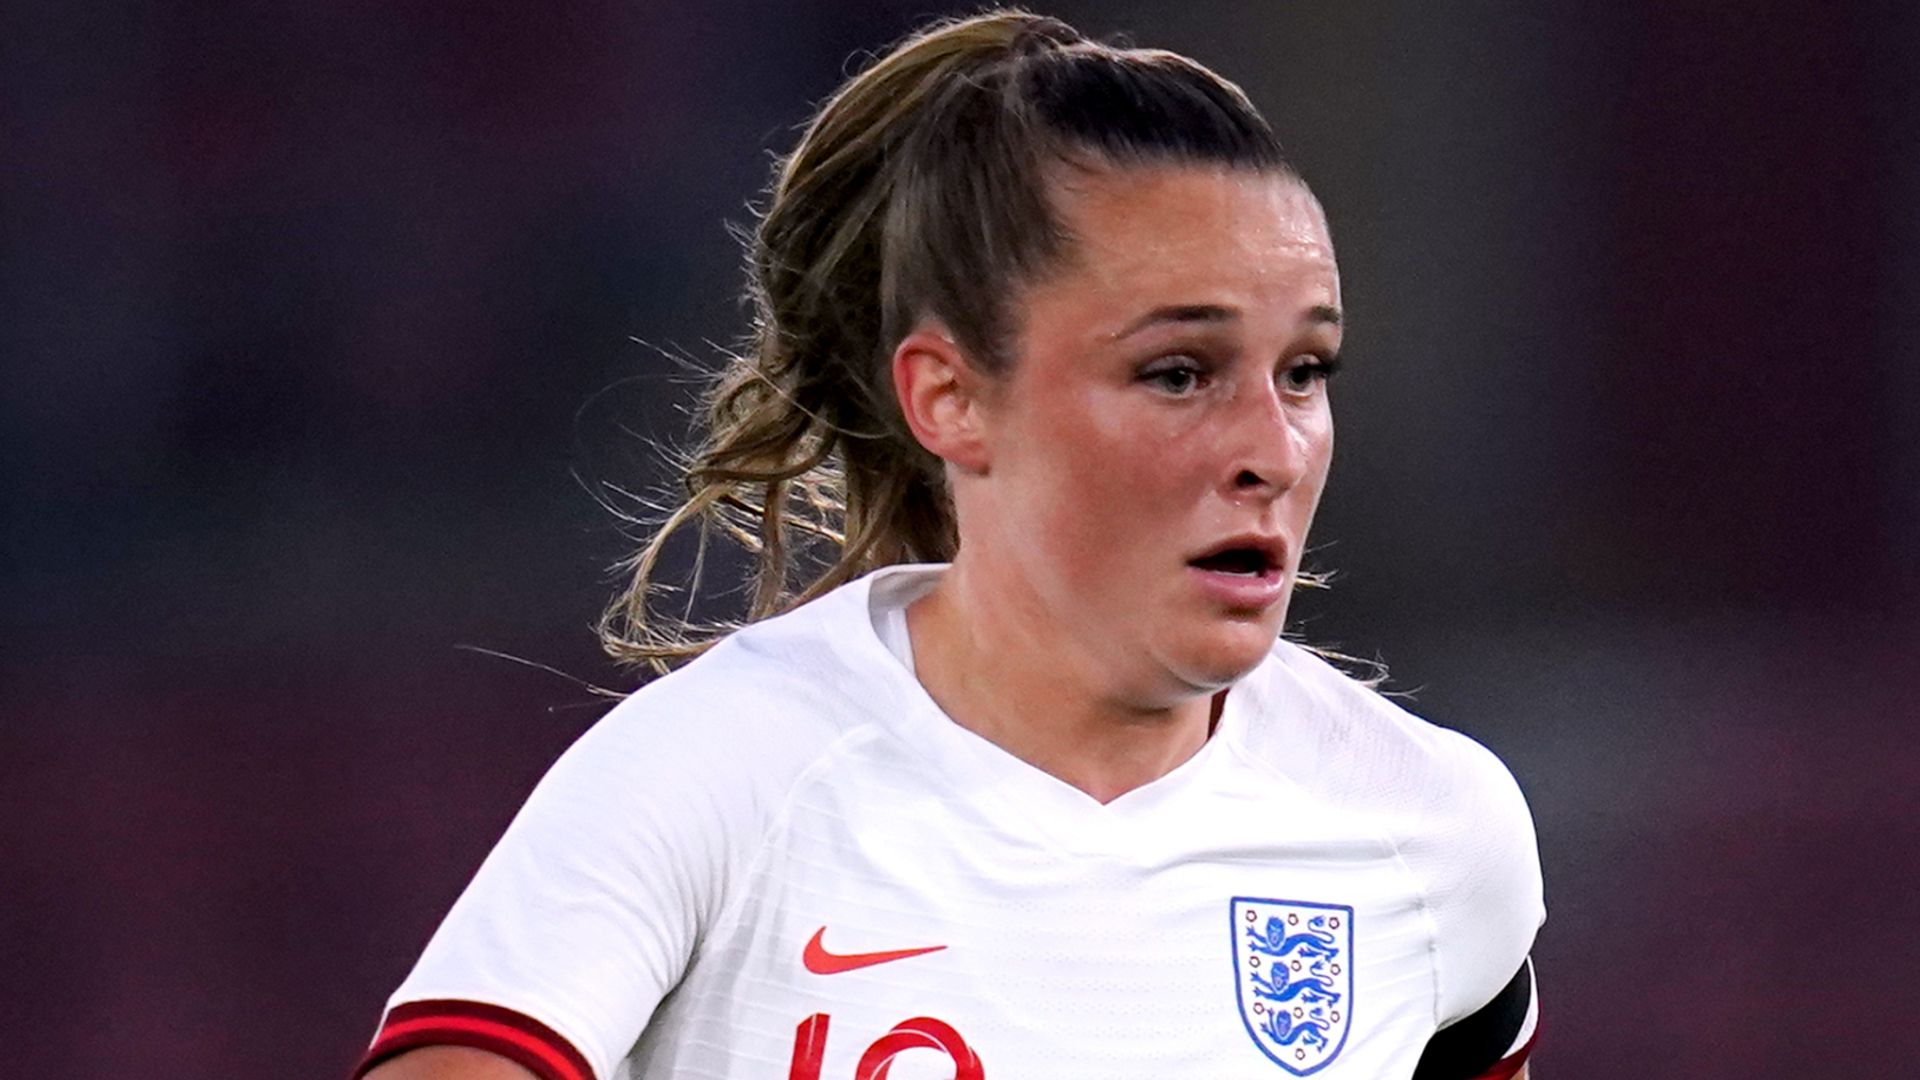 England Women vs N Ireland preview: Toone to be handed chance?